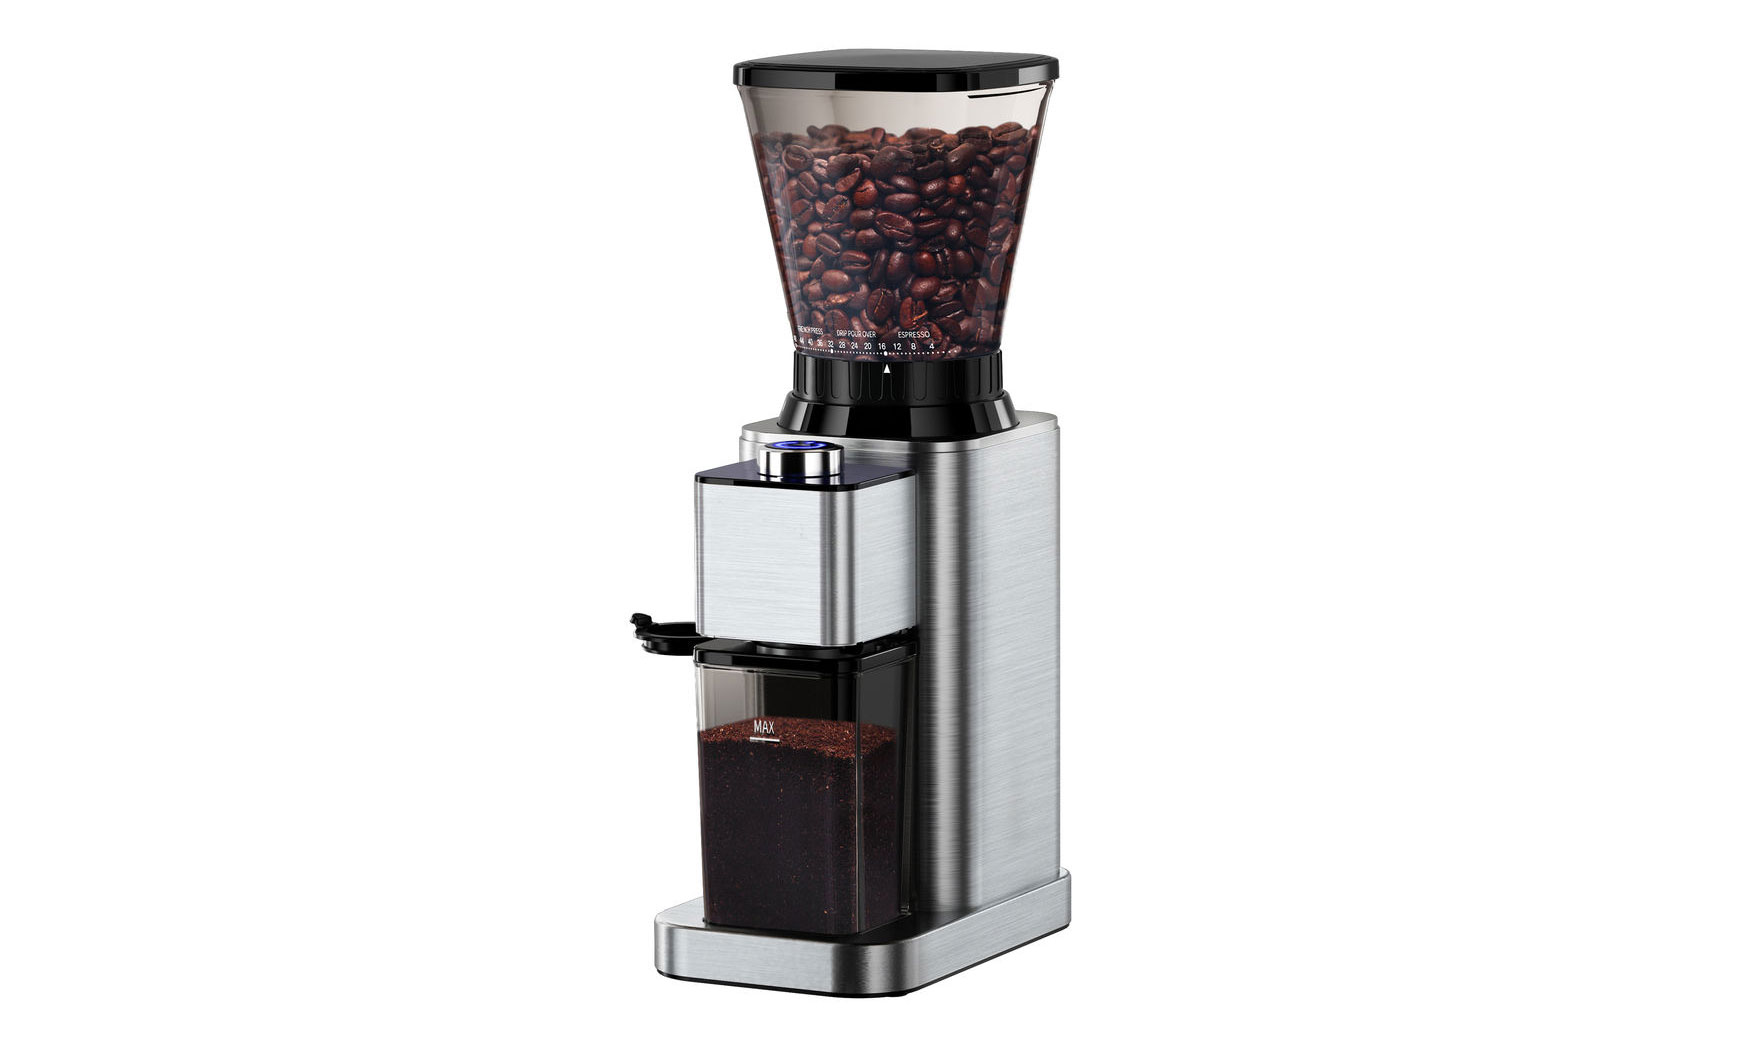 IAGREEA Anti Static Conical Burr Coffee Grinder With 48 Precise Settings,  Adjustable Burr Mill Coffee Bean Grinder For 2 12 Cups, With Precision  Electronic Timer, Black From Juulpod, $46.28